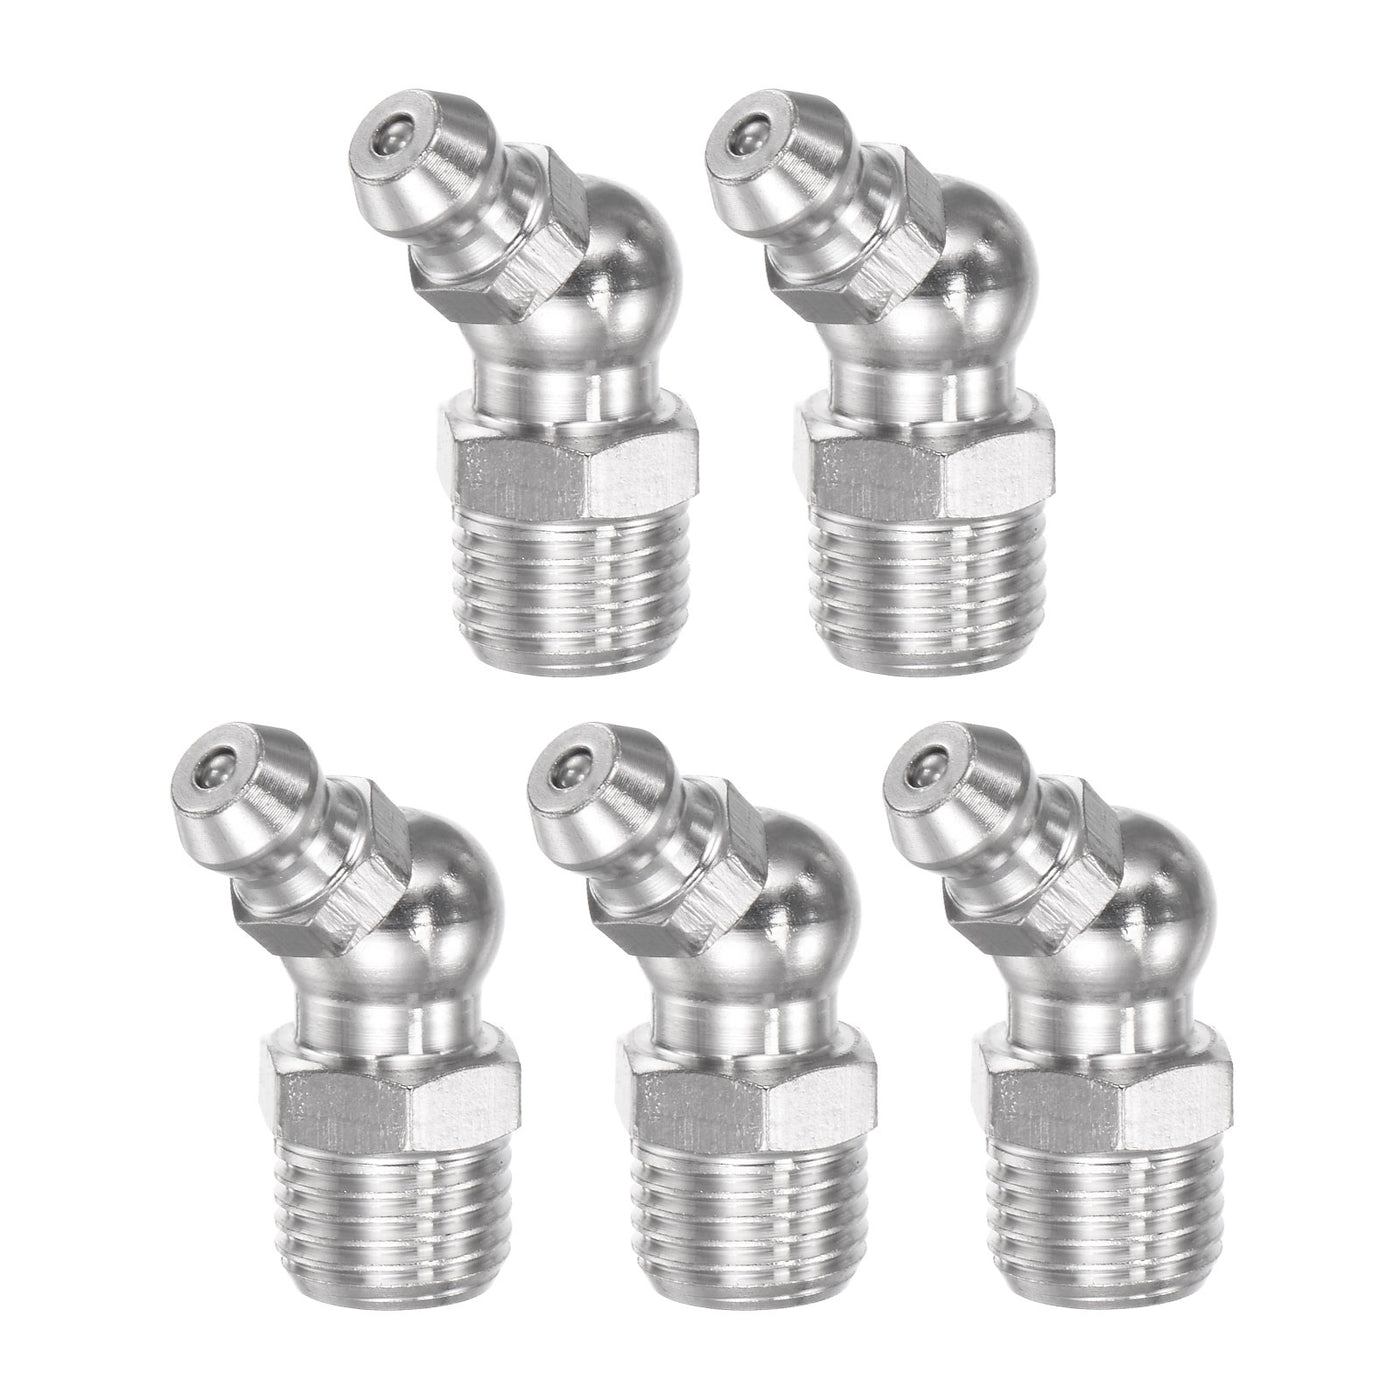 Uxcell Uxcell 304 Stainless Steel 45 Degree Hydraulic Grease Fitting M10 x 1mm Thread, 5Pcs